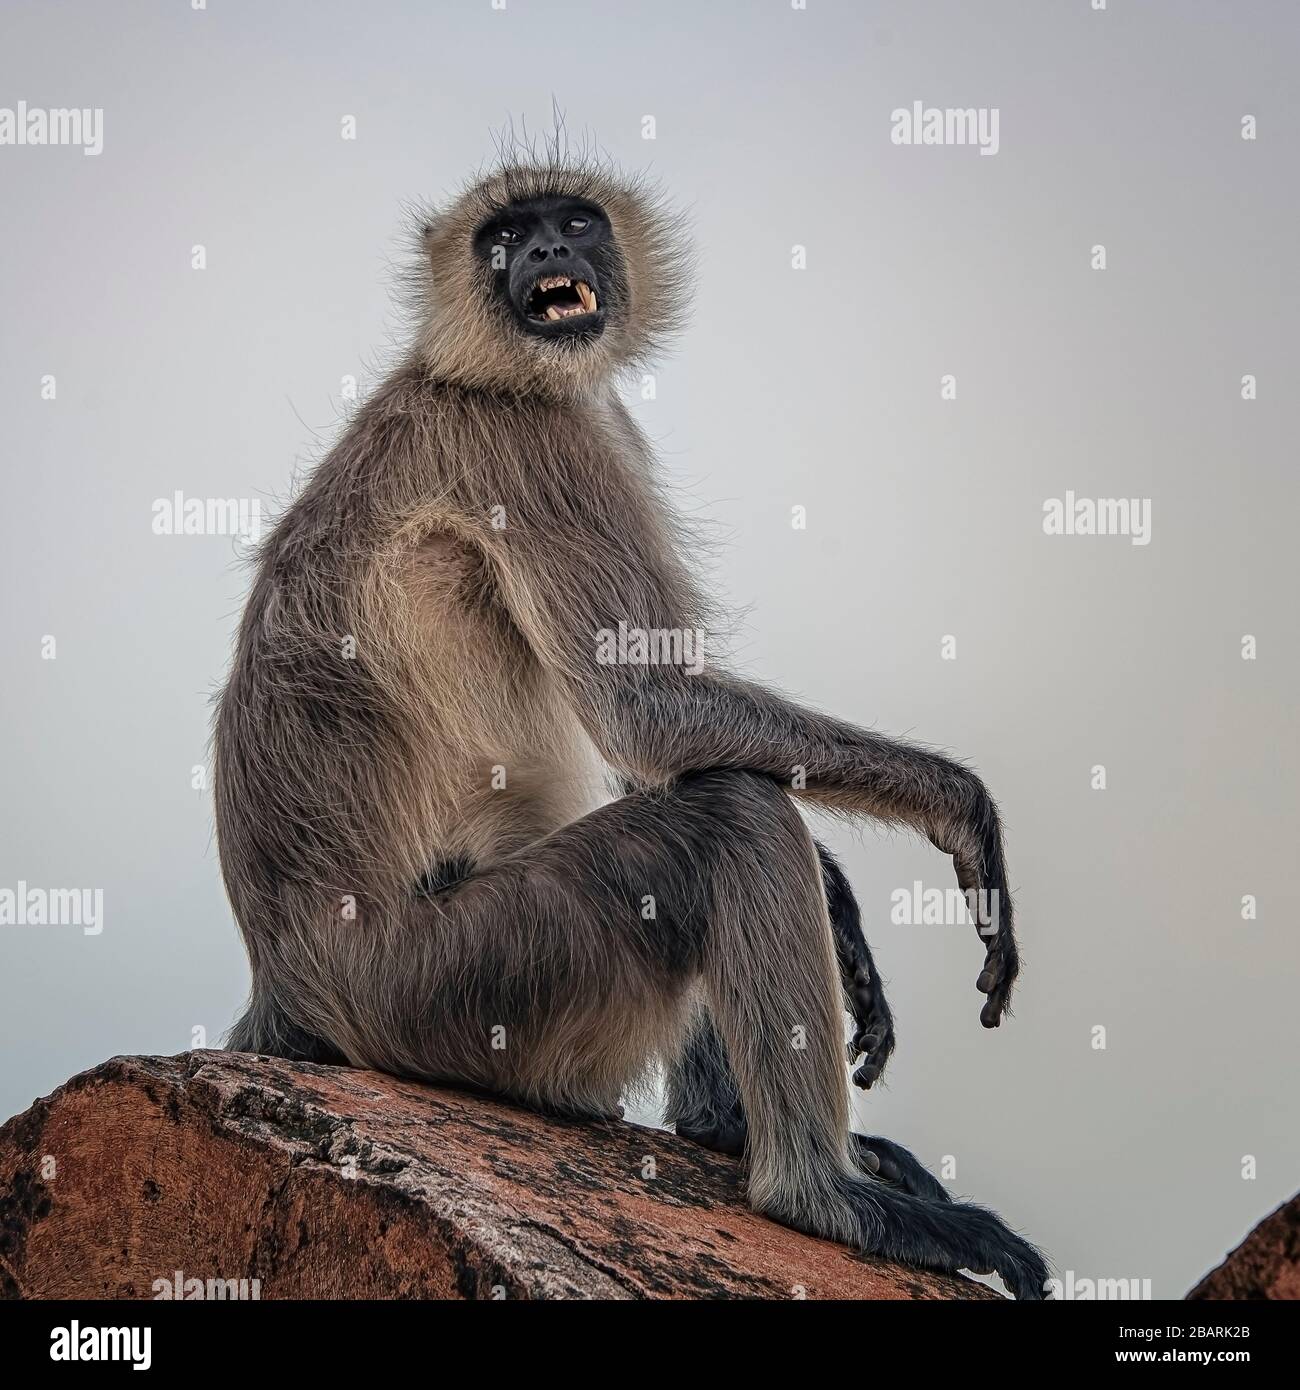 Scimmia macaque selvatica in Rajasthan, India Foto Stock